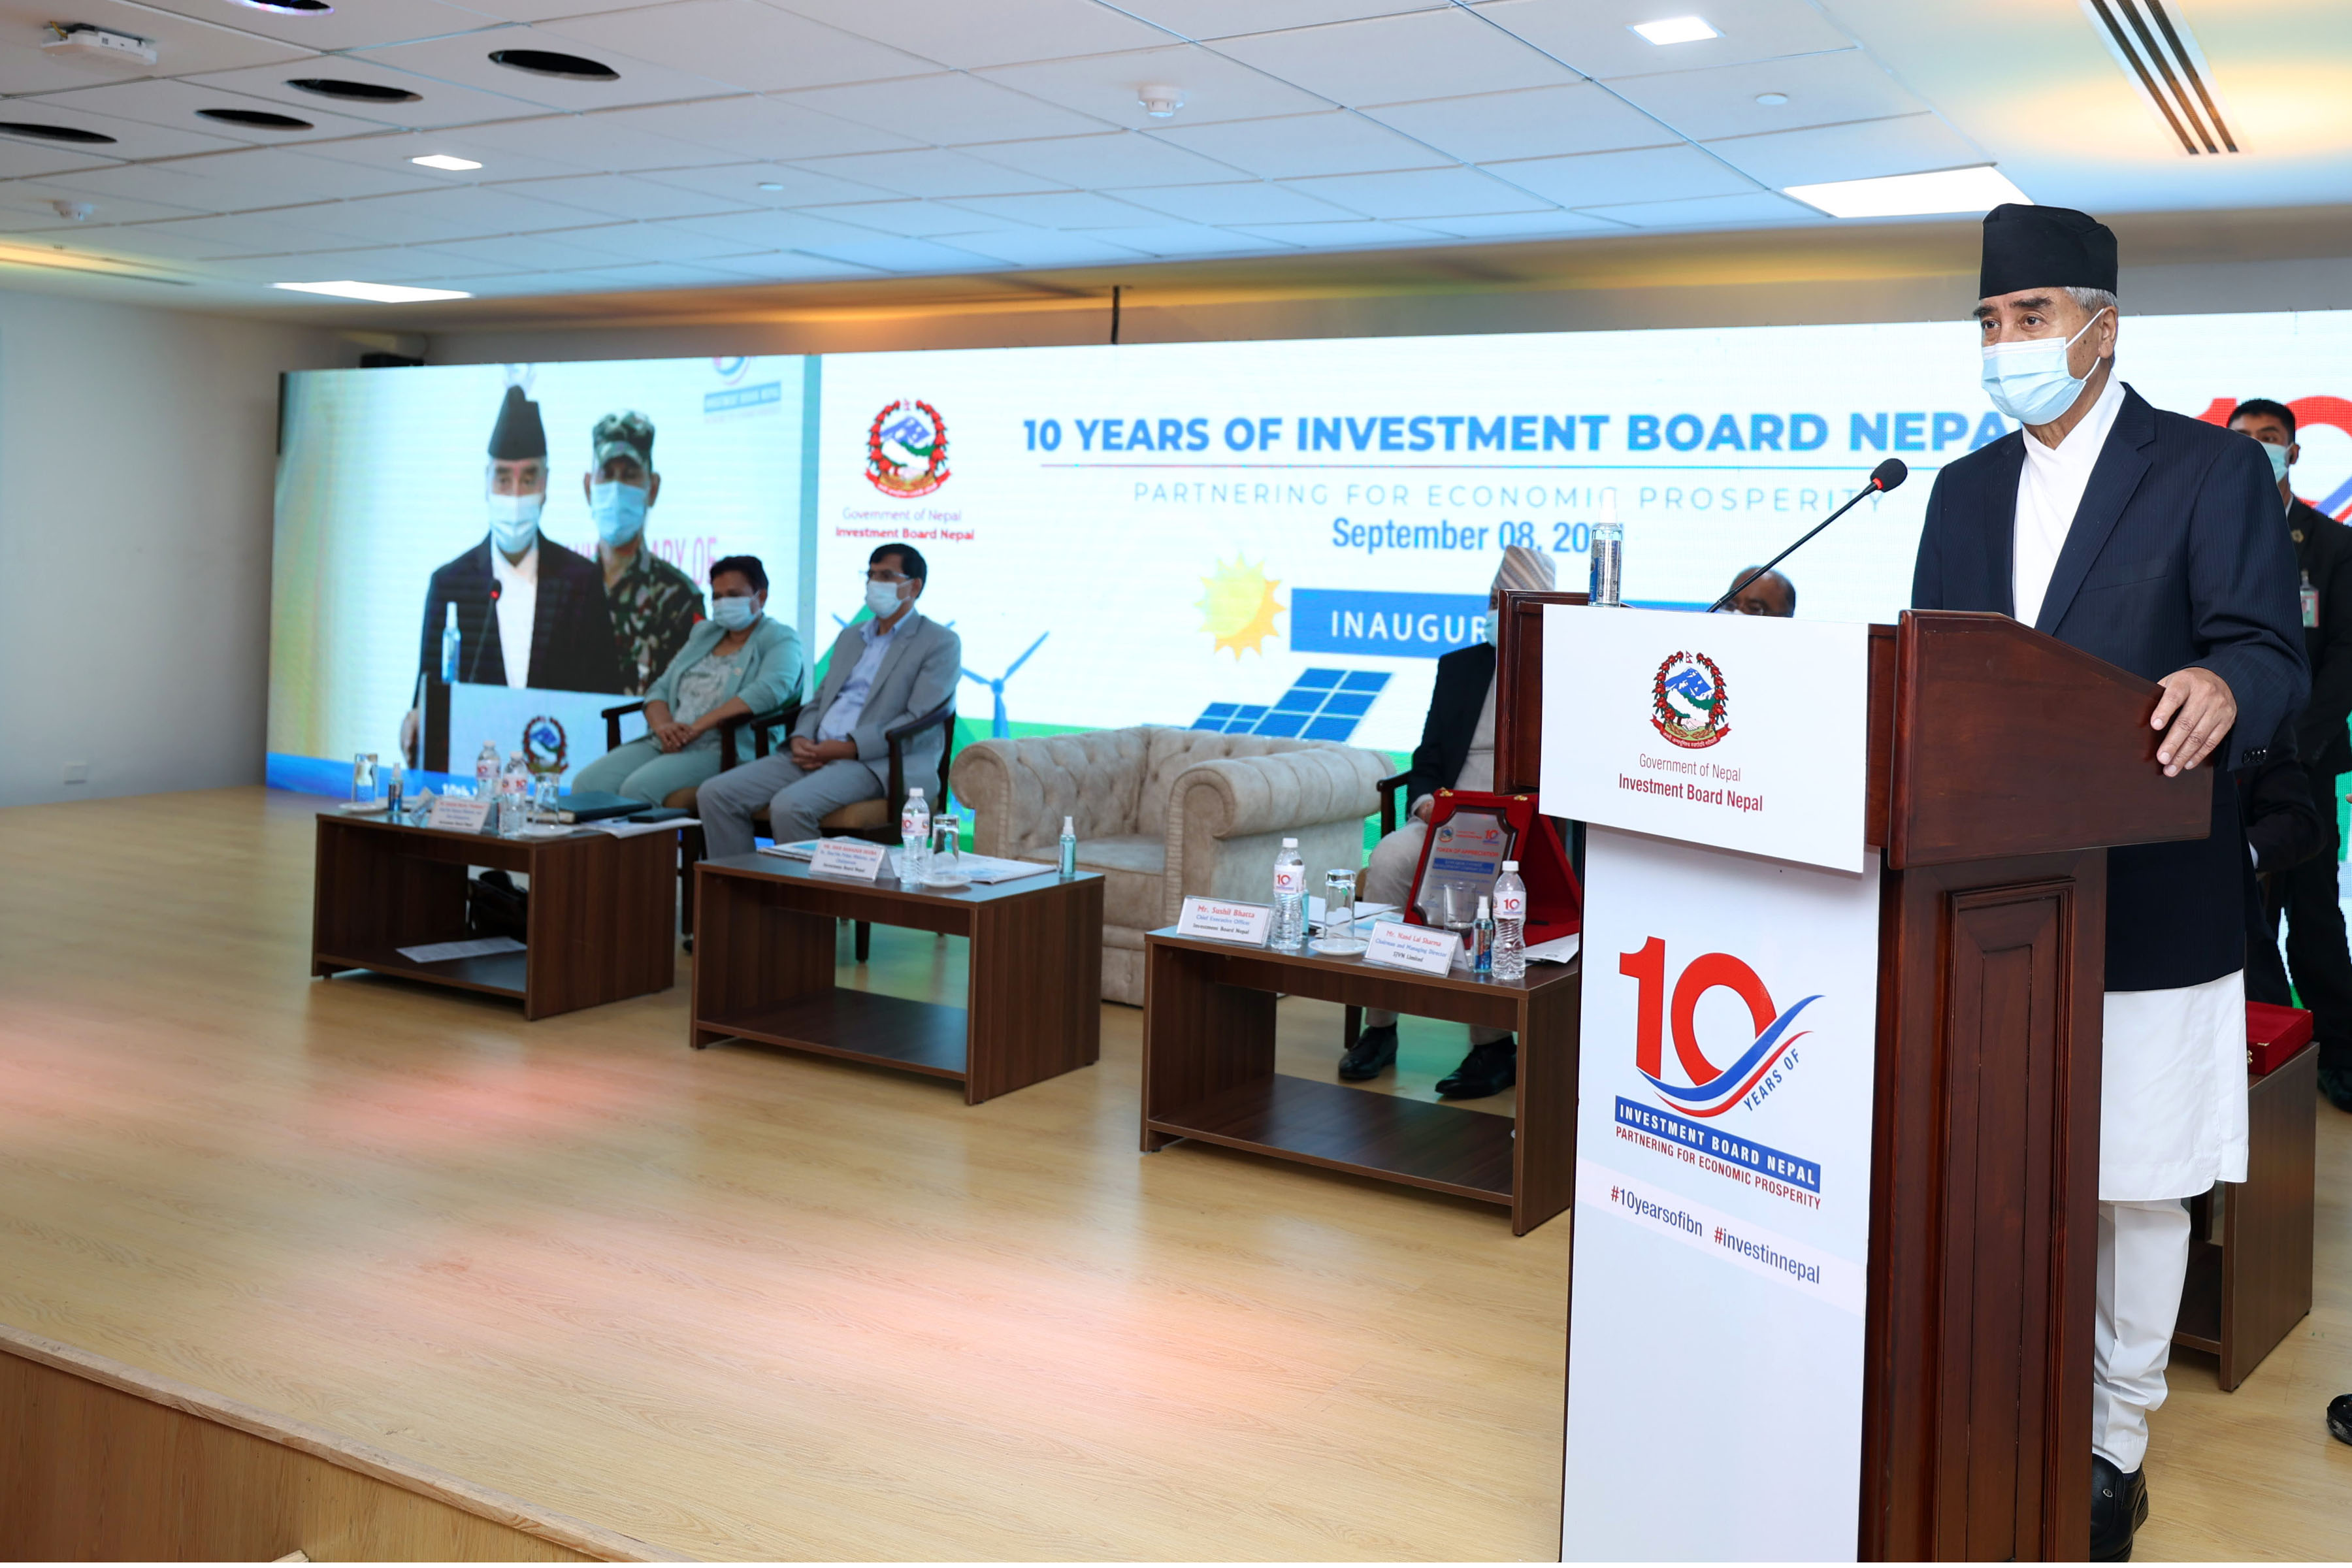 ibn-brings-out-strategic-plan-targets-to-attract-10-bln-fdi-in-5-years